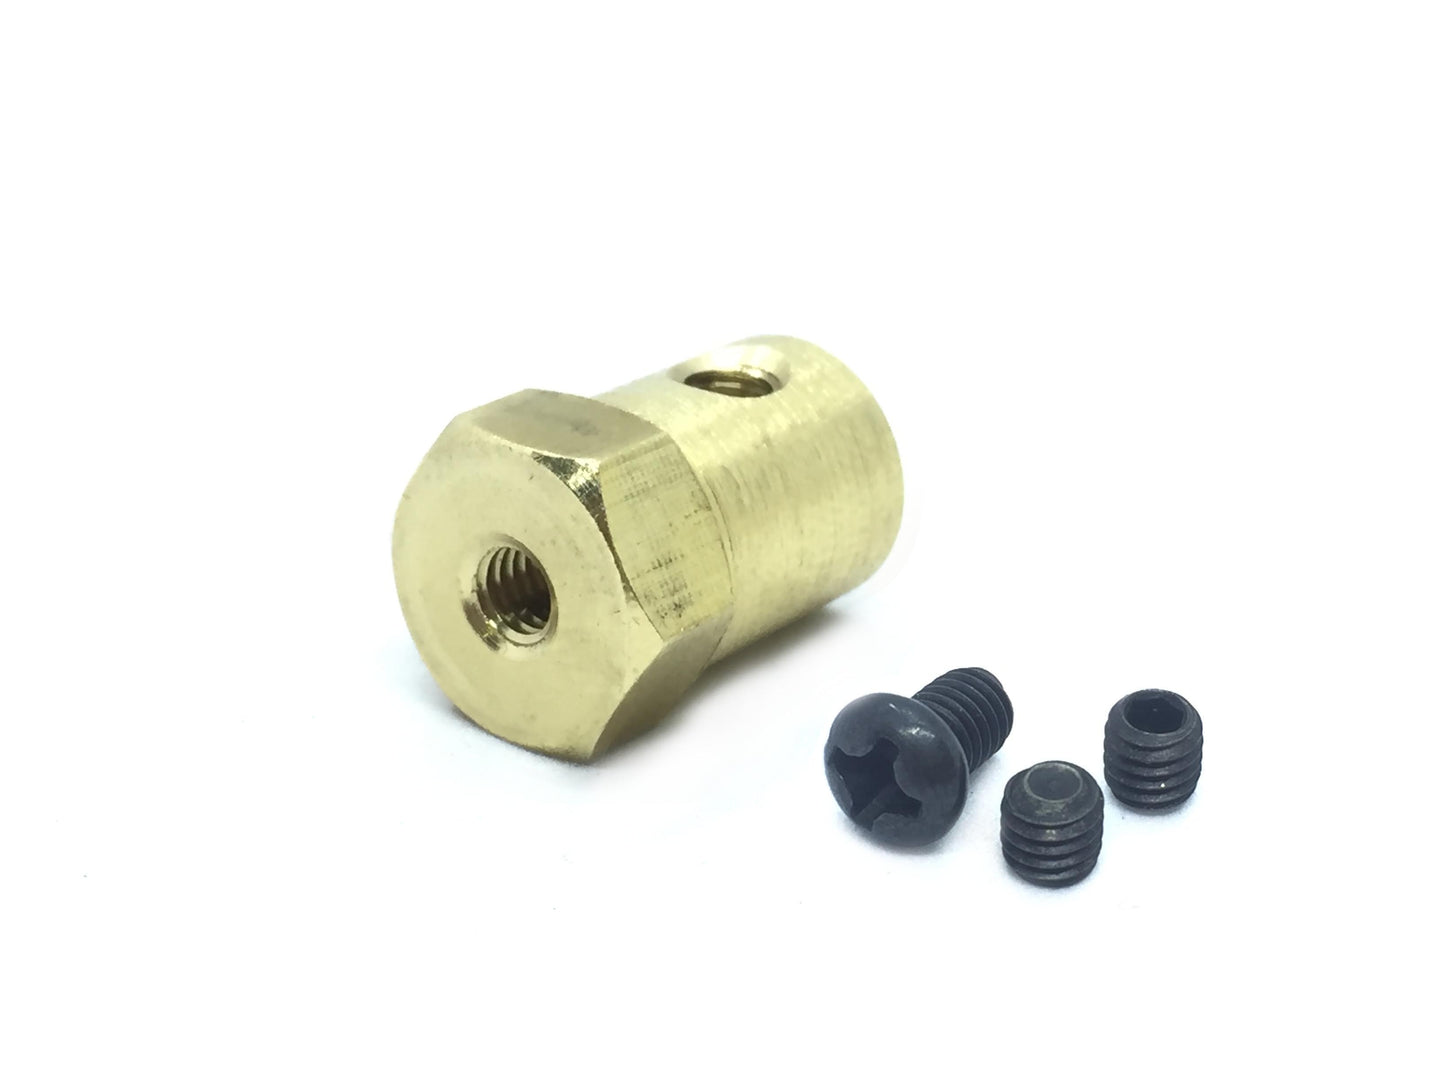 Coupling 3.17mm Hexagon Brass for Motor Shafts and Wheel